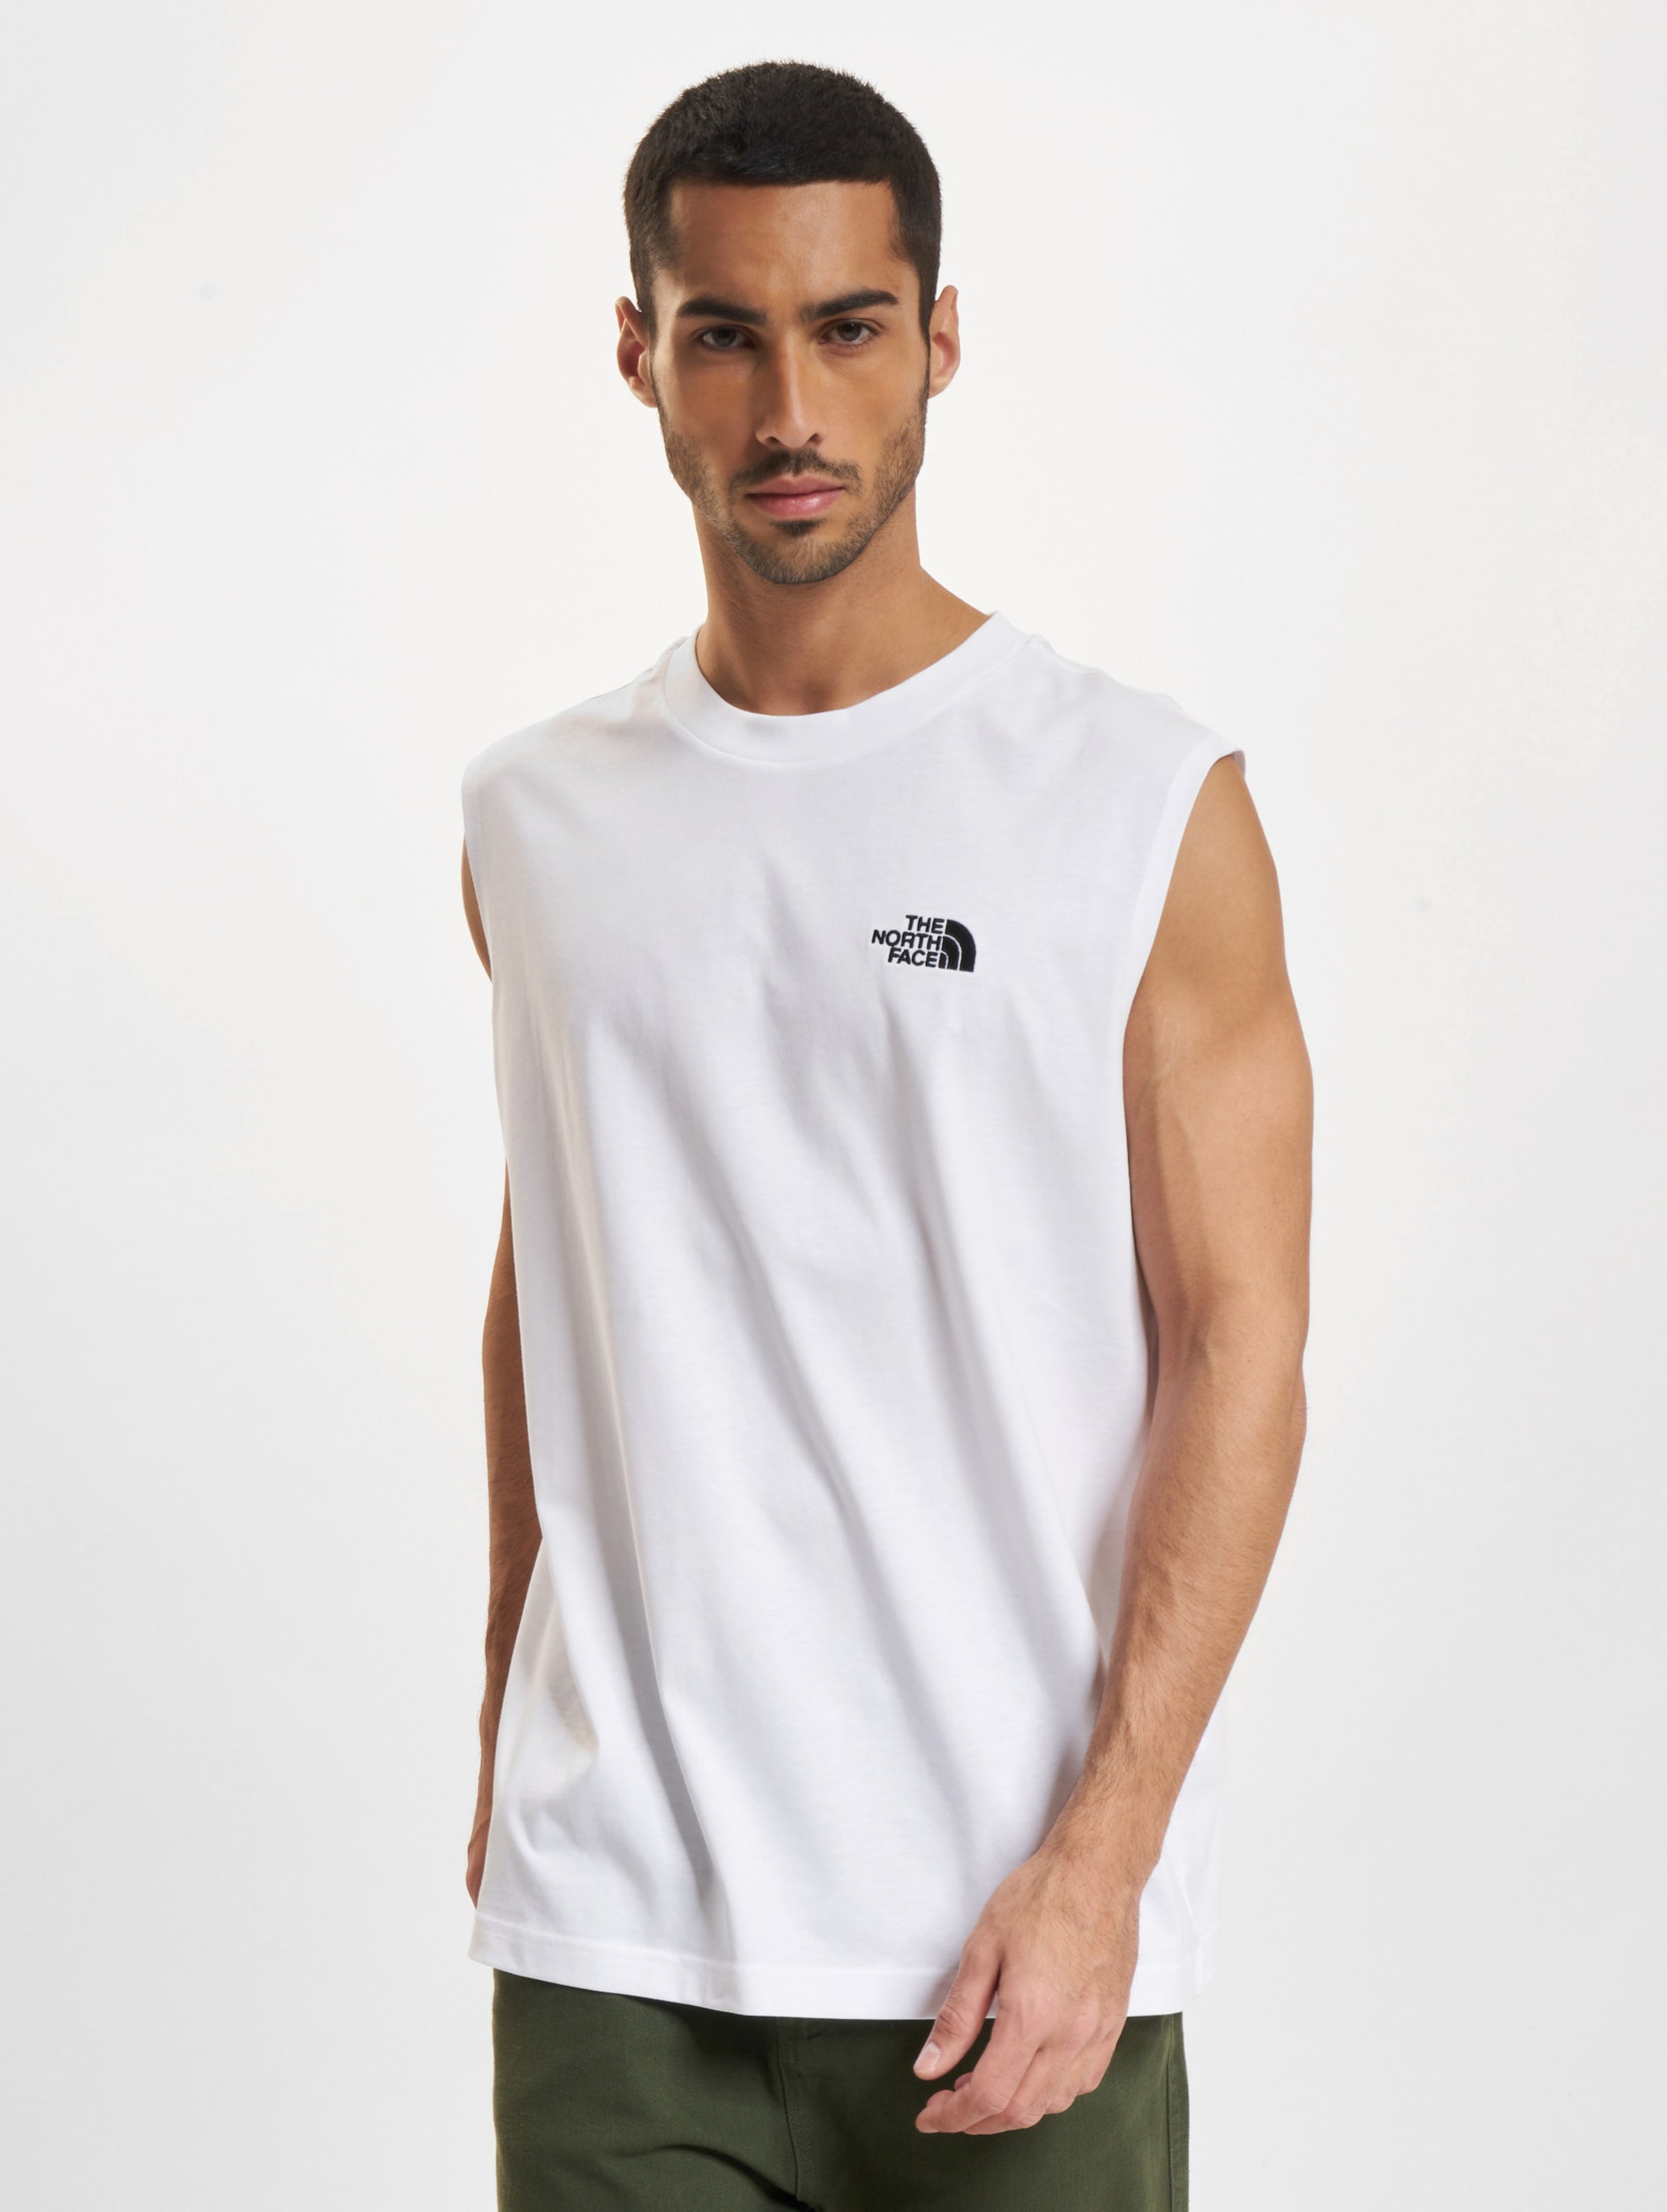 The North Face Oversize Simple Dome Tank Top Mannen op kleur wit, Maat L